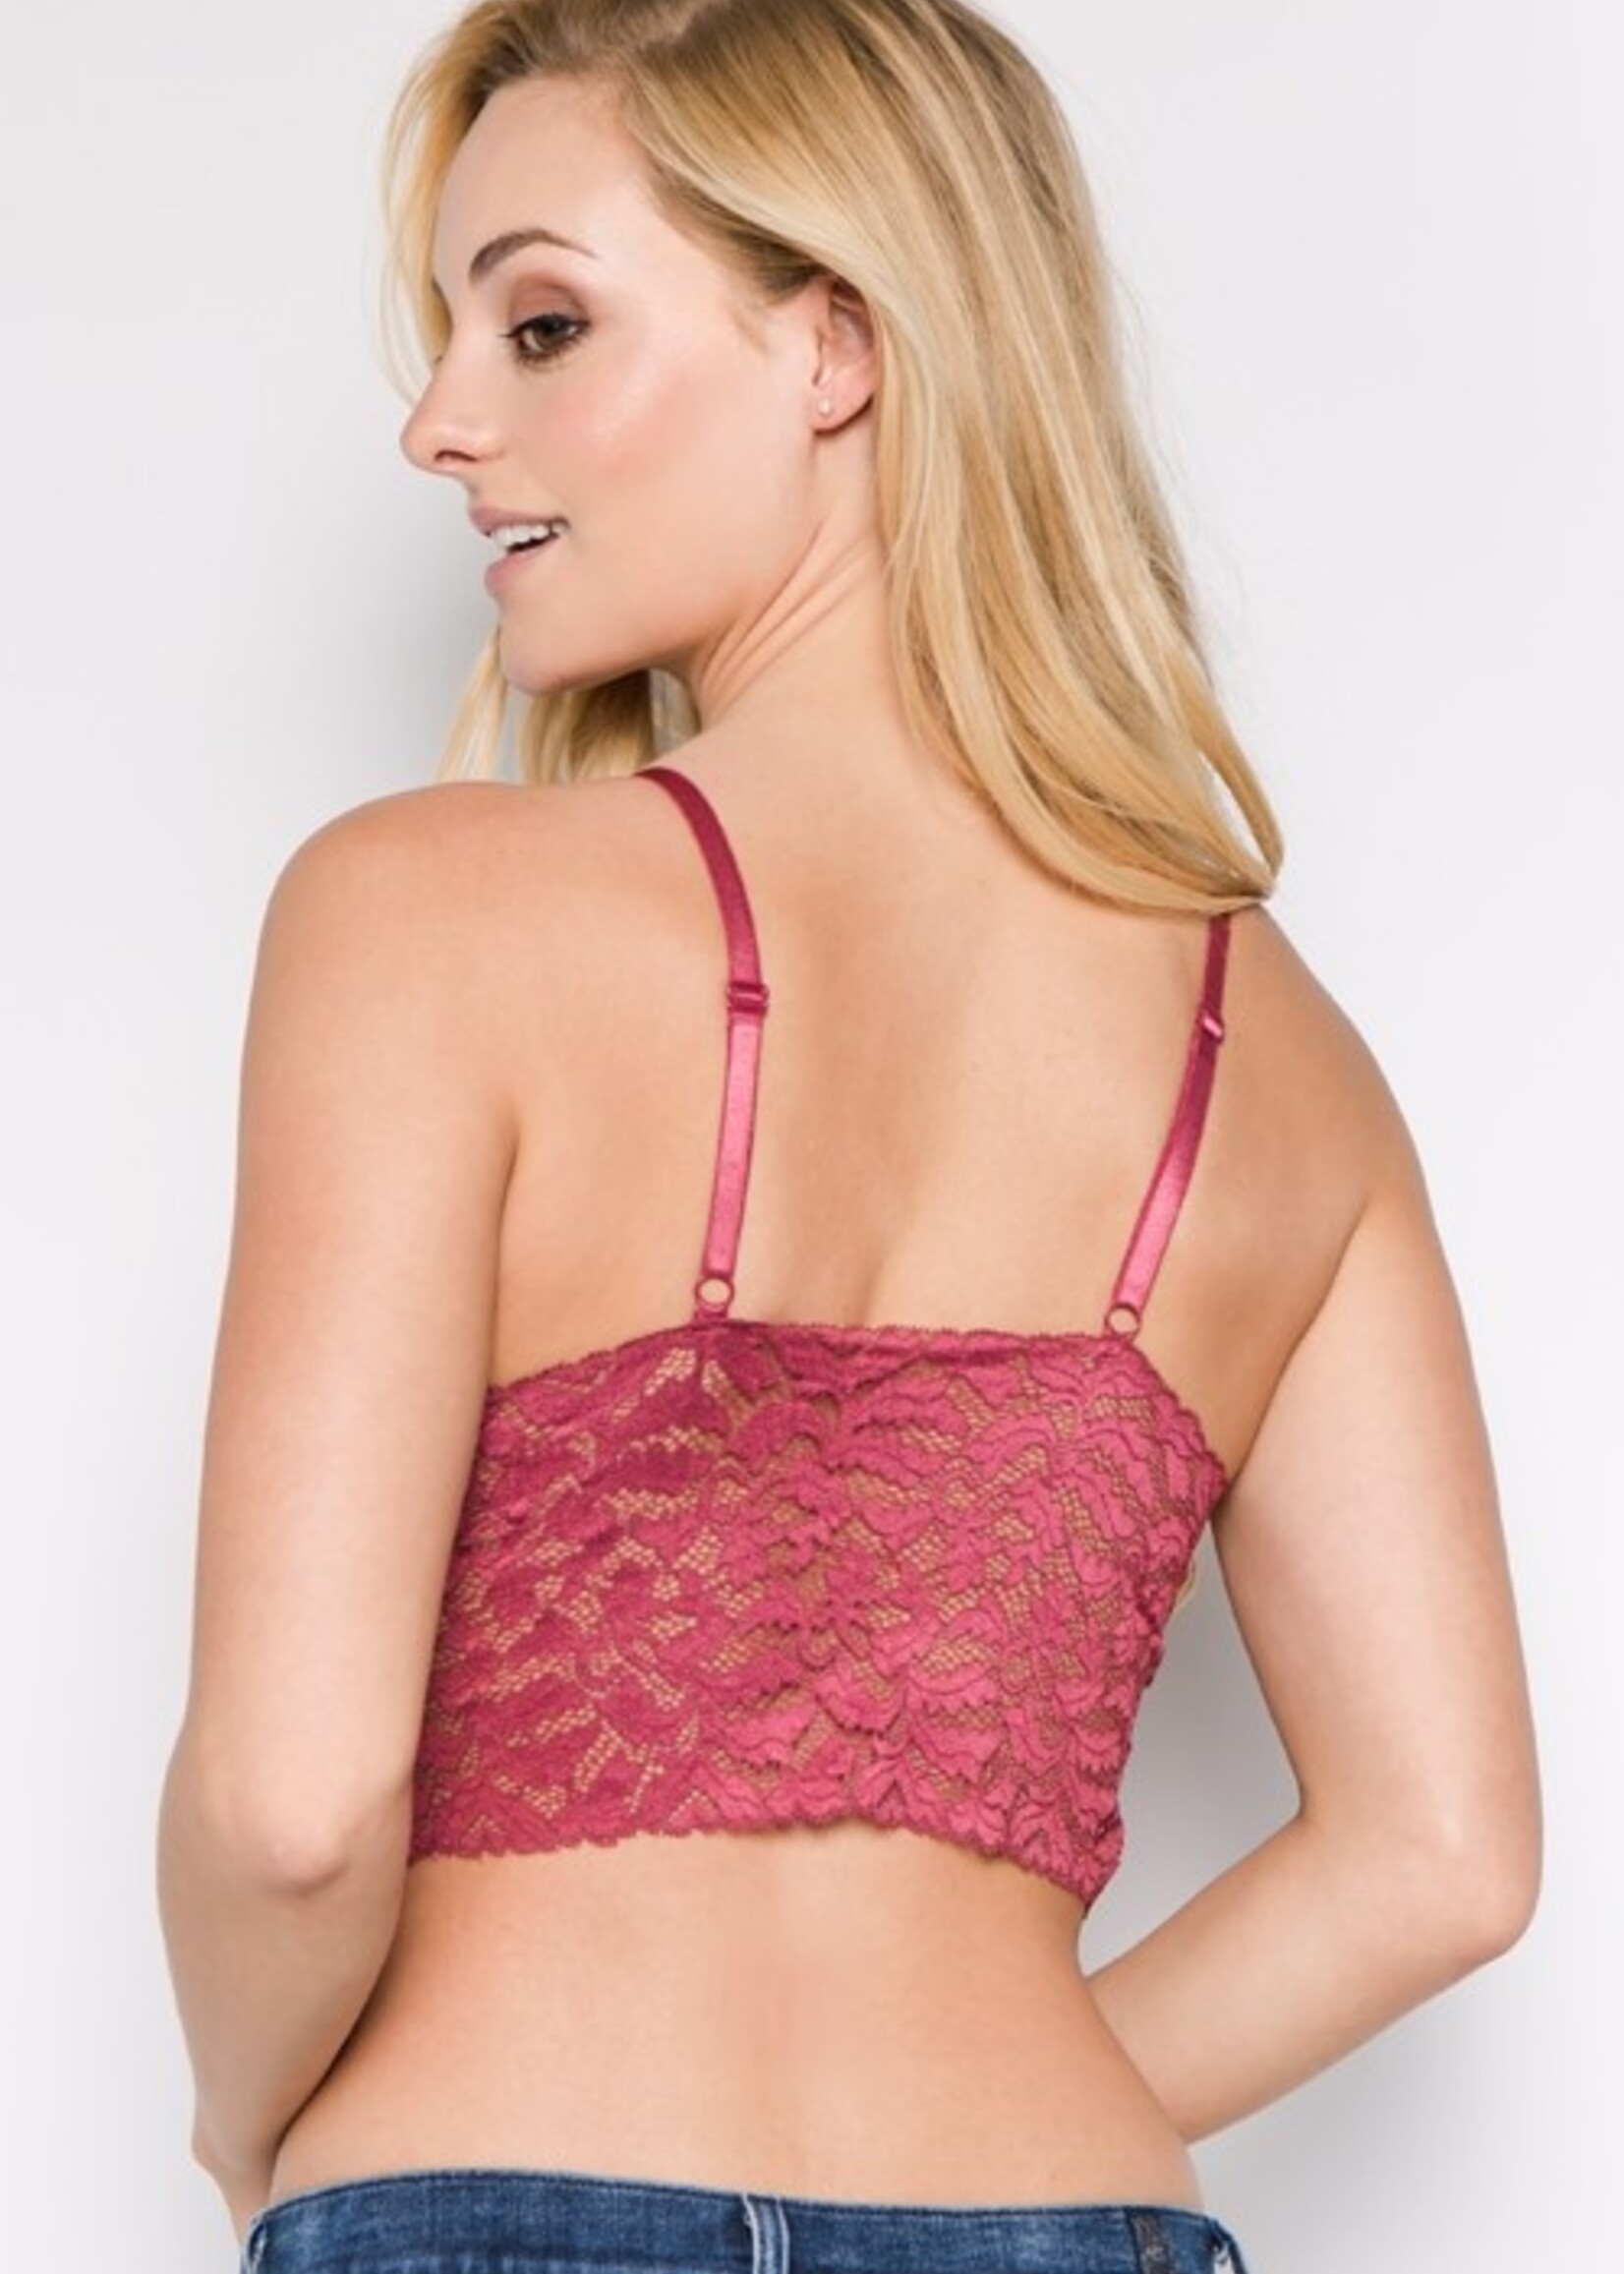 Lace all-in-one Bra and Cami - Raspberry